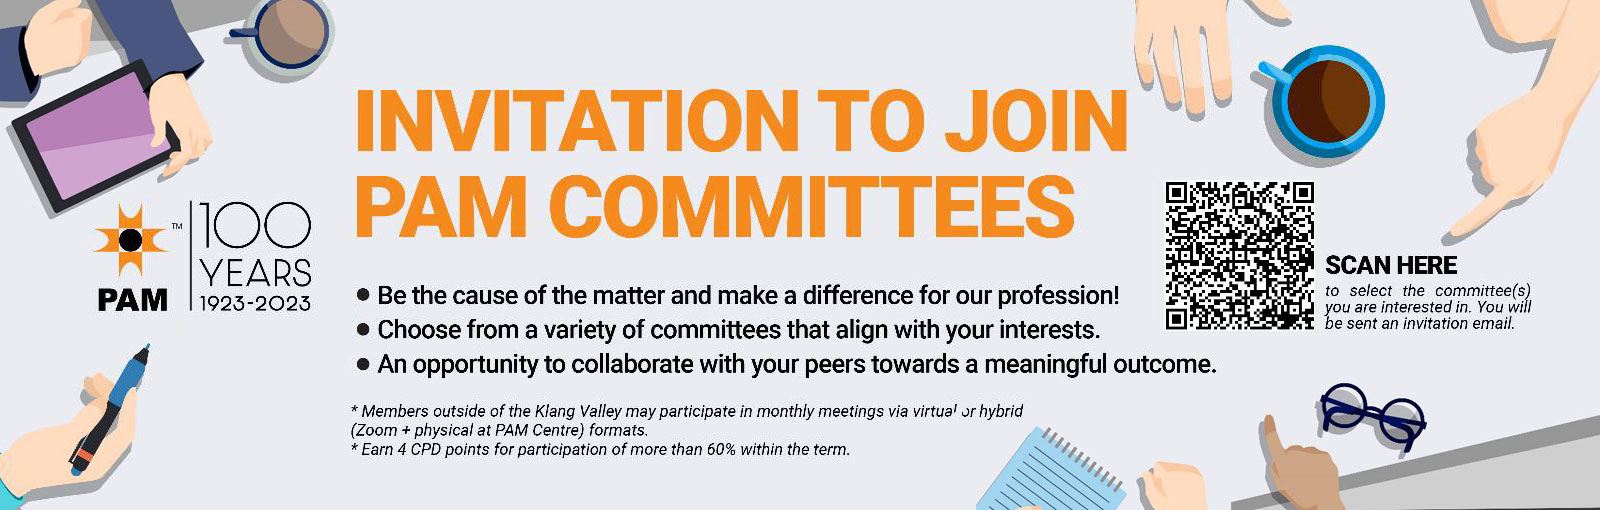 Invitation to Join PAM Committees